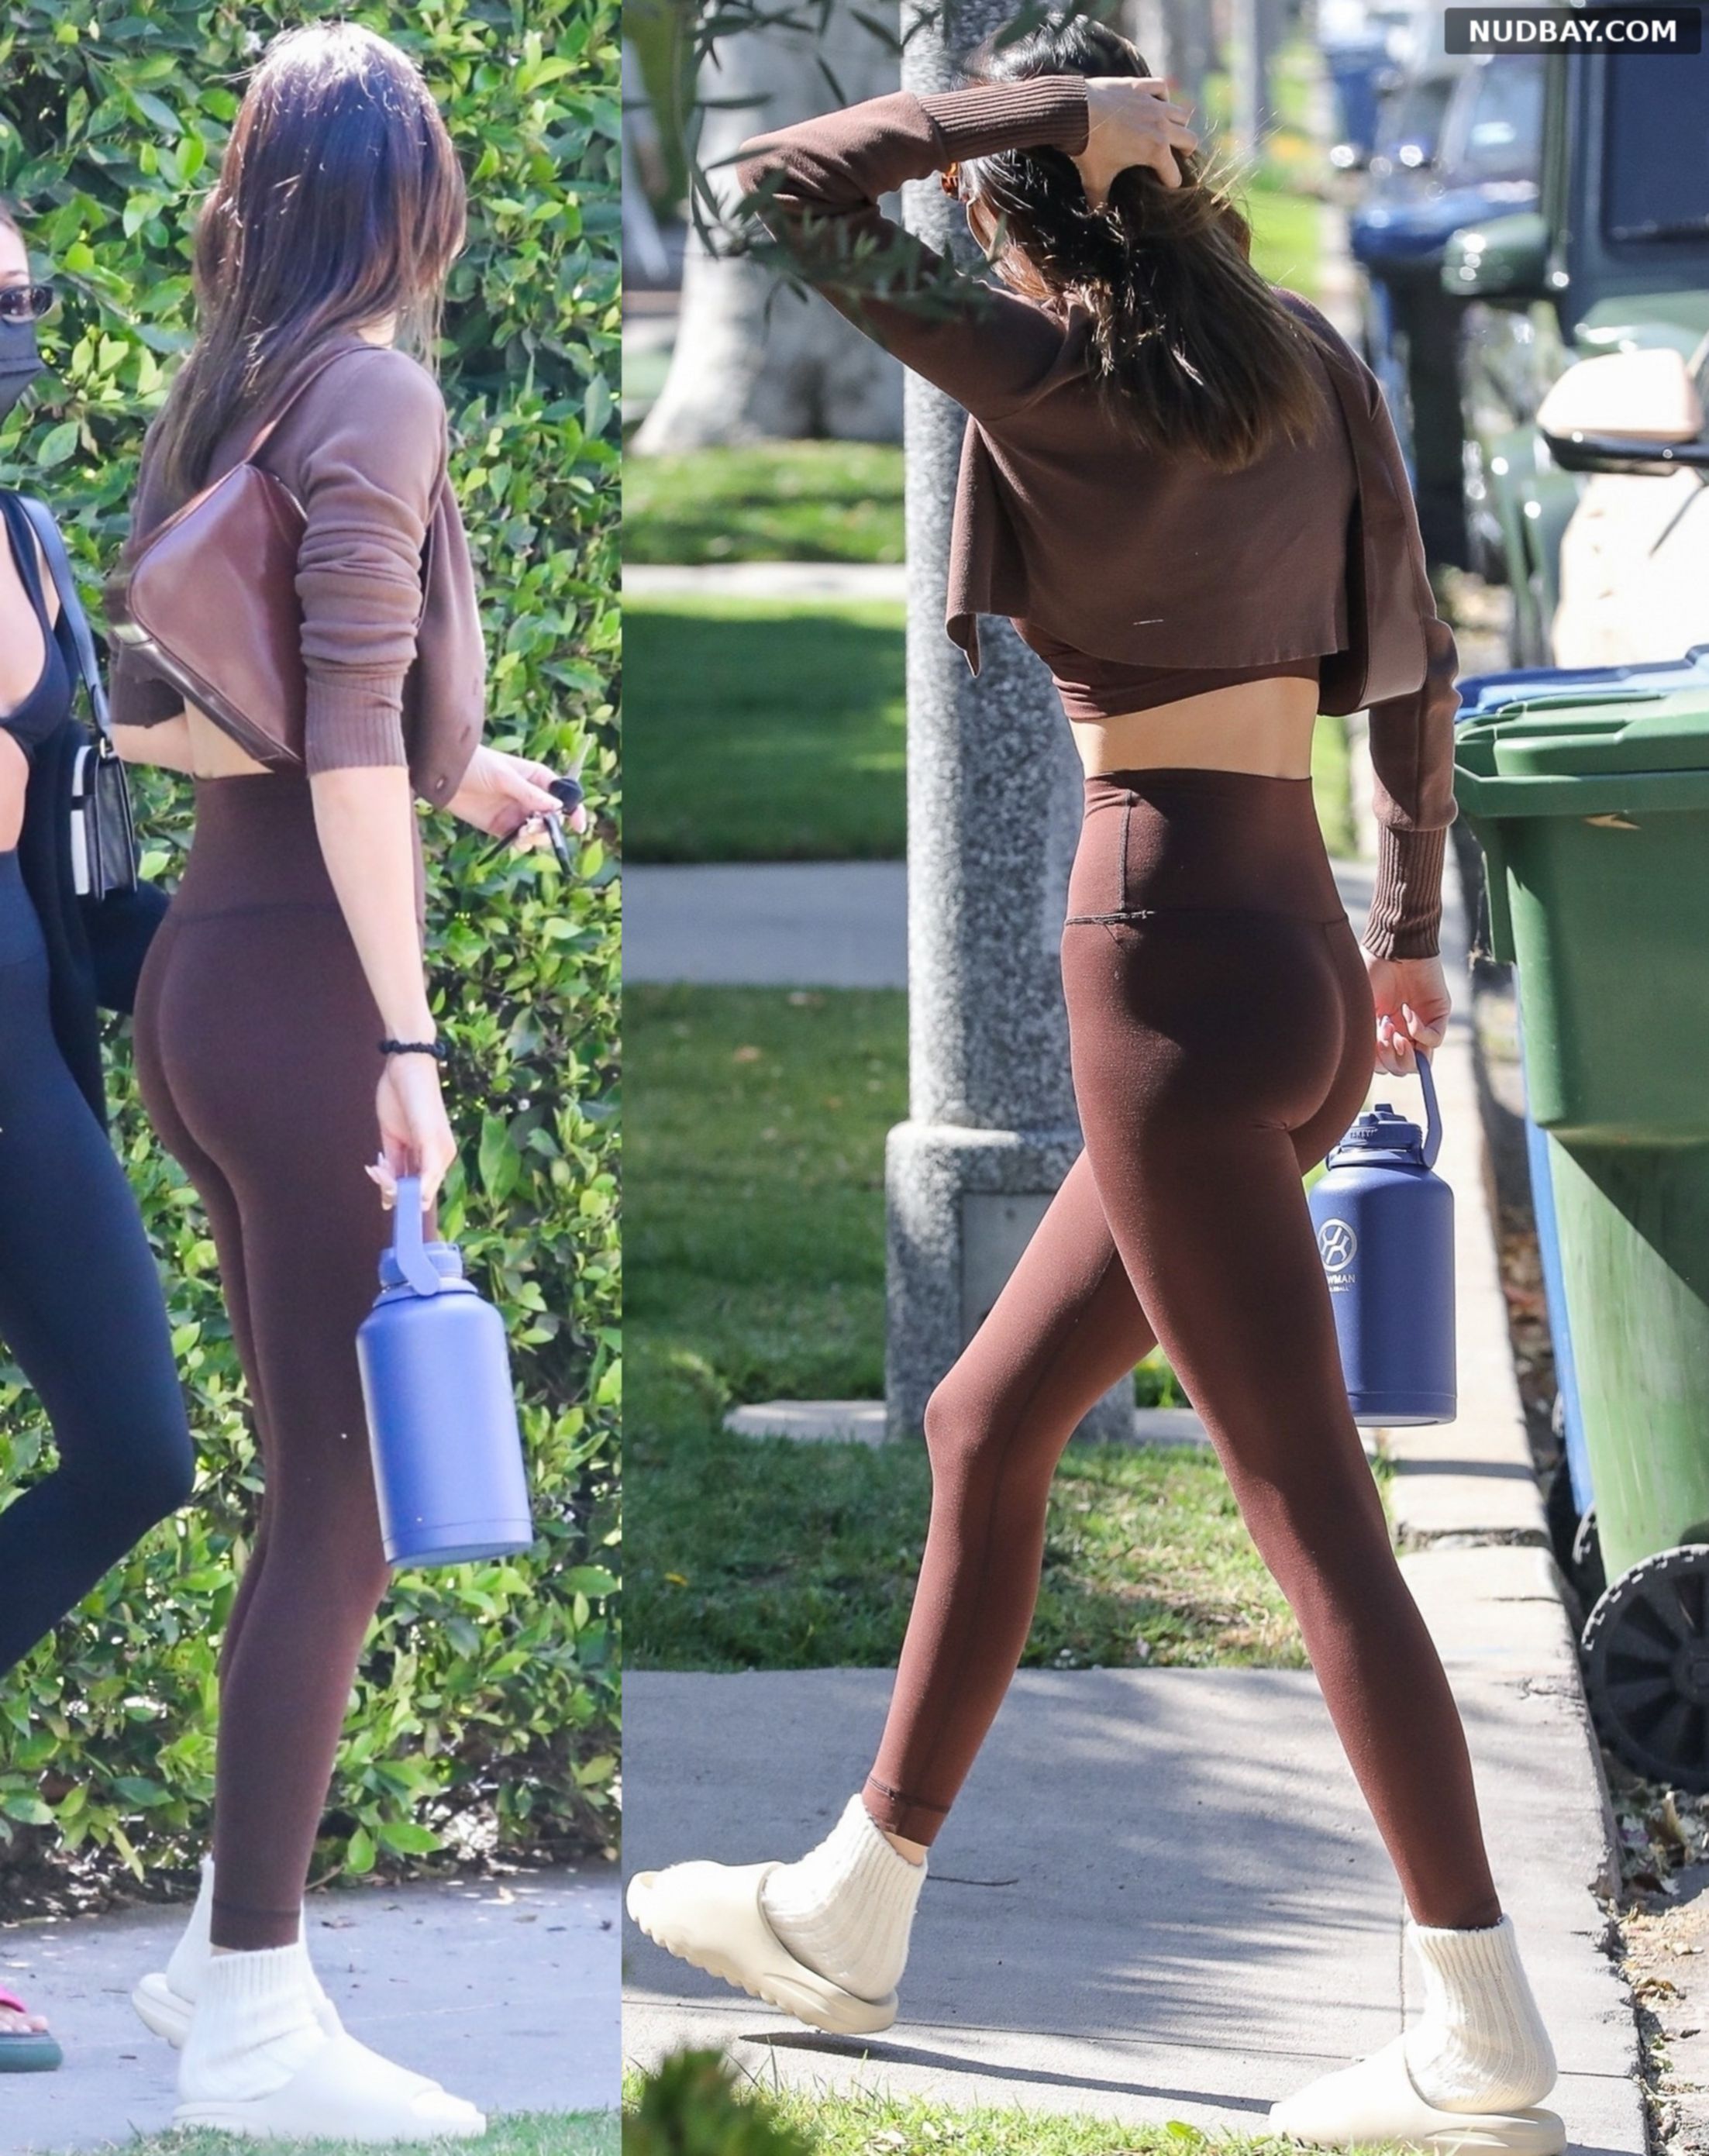 Kendall Jenner Ass Outside A Workout In West Hollywood Apr 7 2021 Nudbay